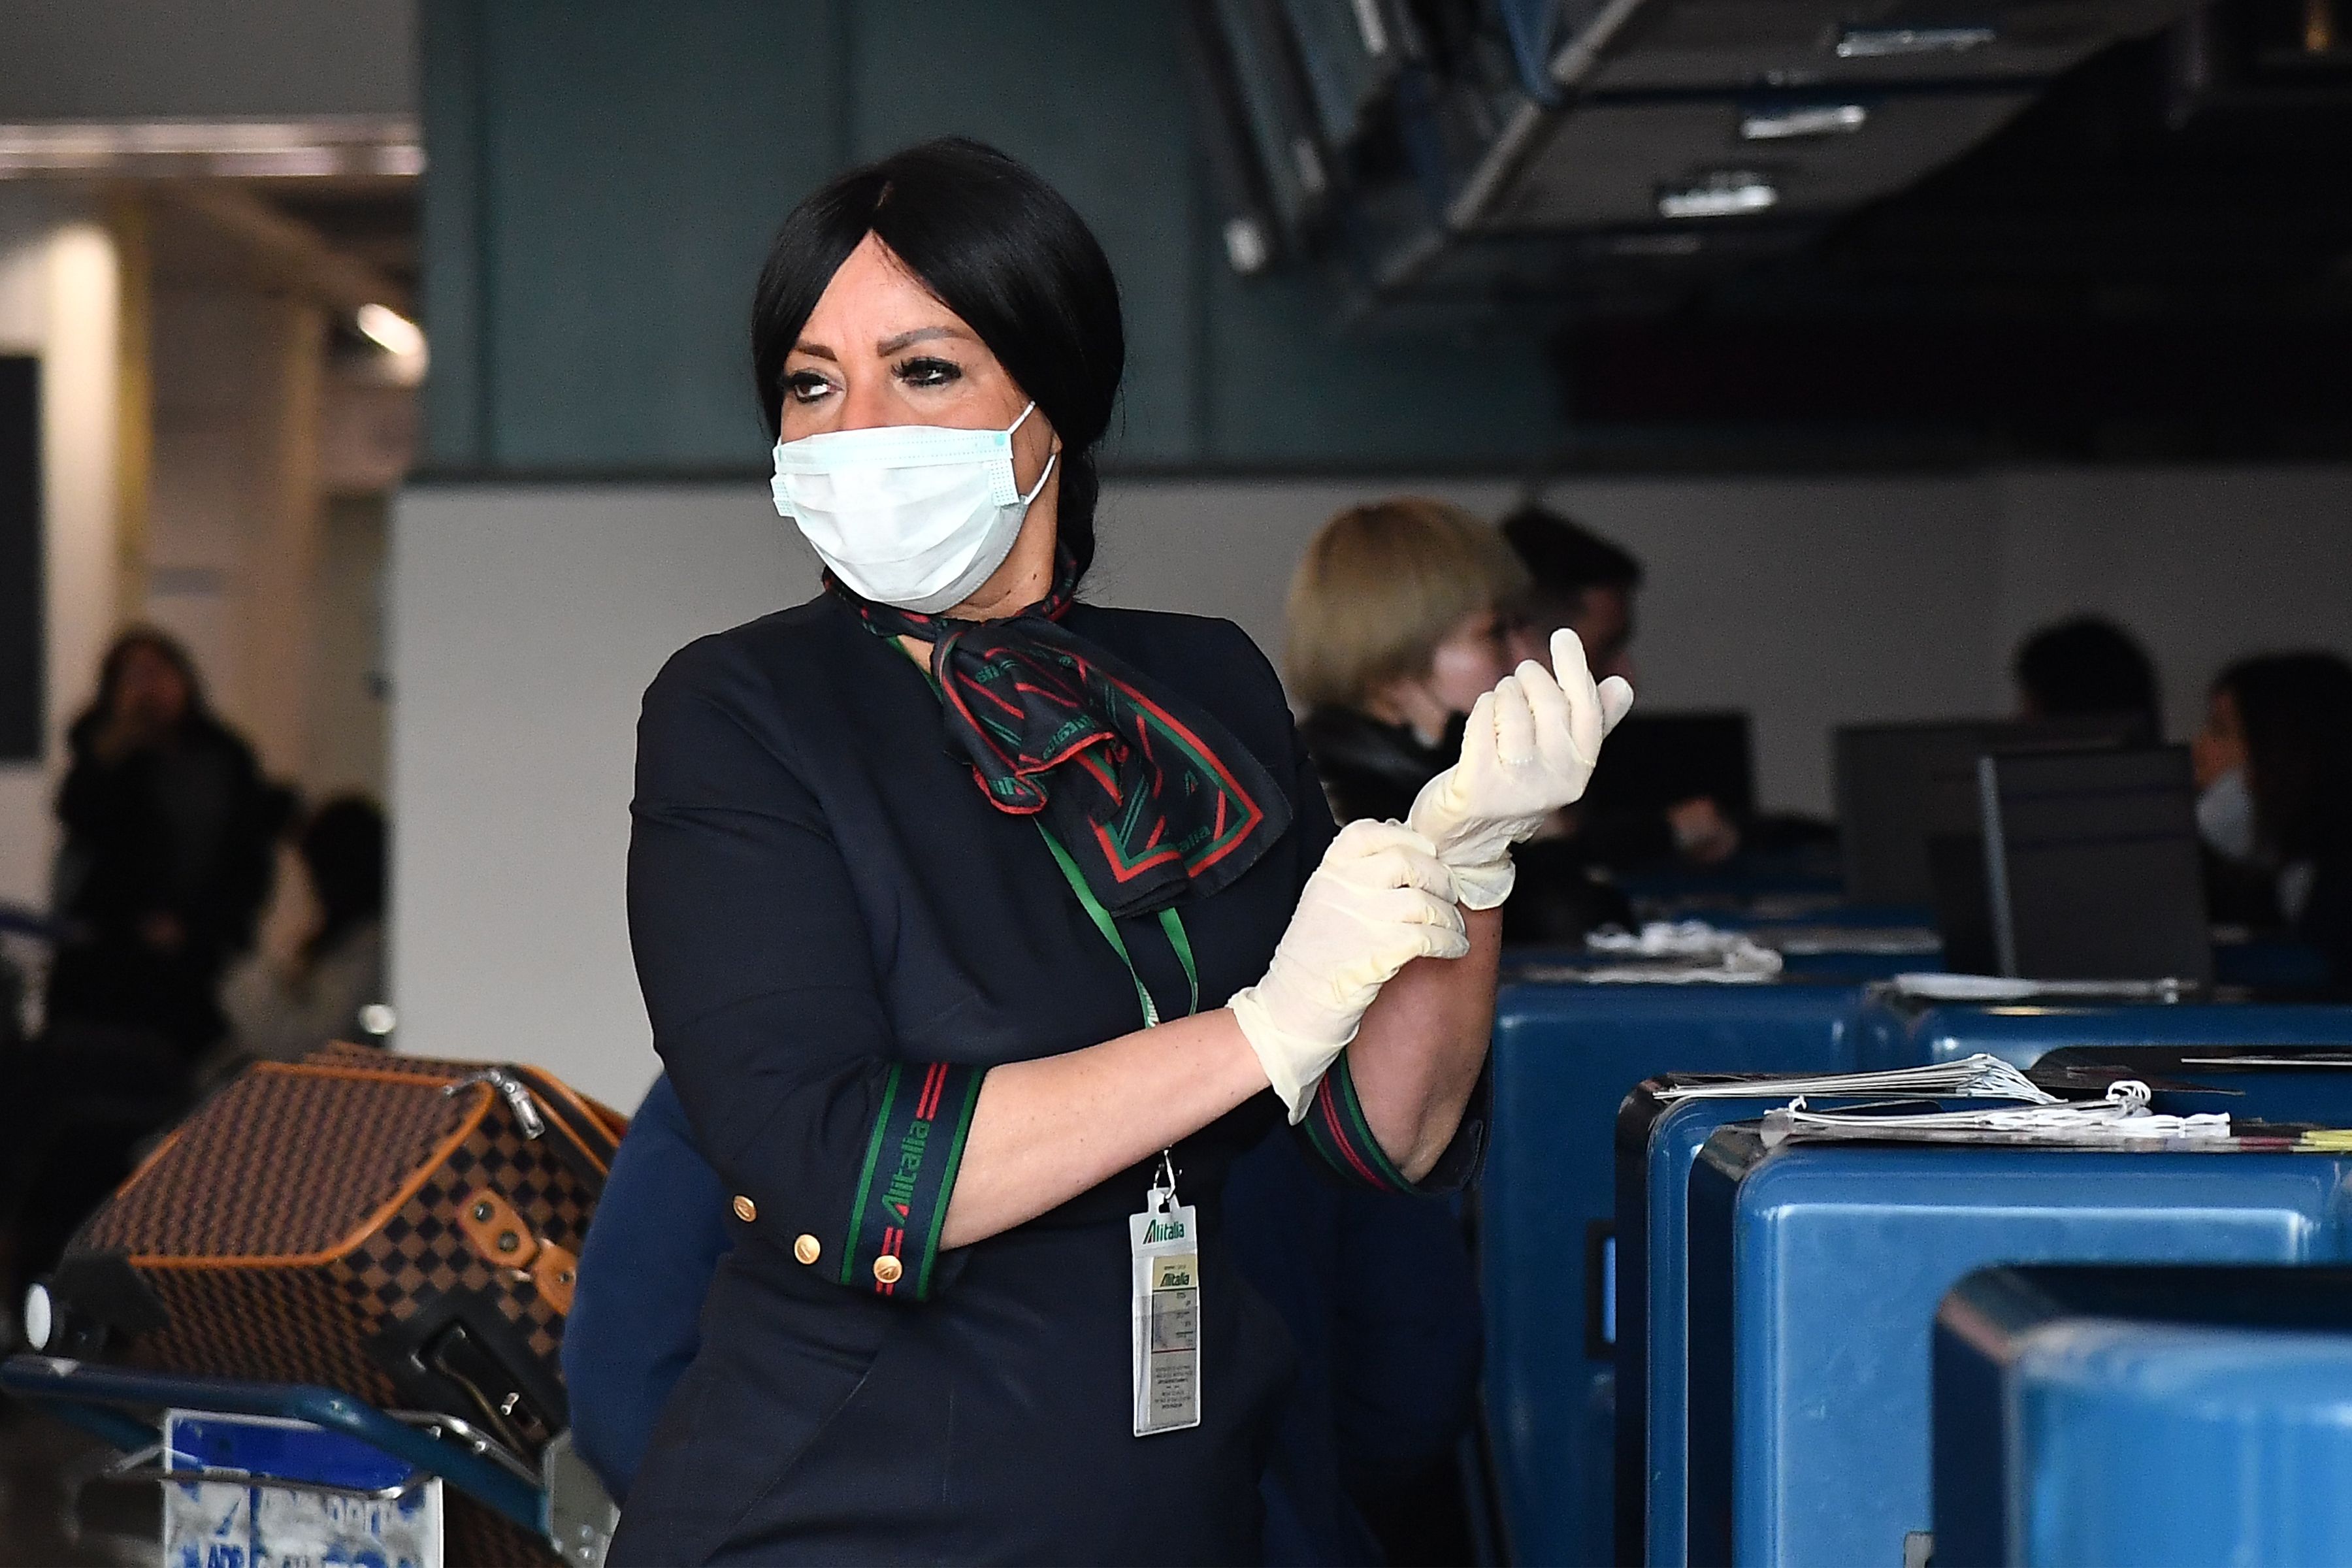 An airport employee puts on protective gloves and respiratory mask as she prepares to do passengers' check in at the counter of China Southern Airlines at Rome's Fiumicino airport, for a flight returning to Wuhan, China. (Photo by TIZIANA FABI/AFP via Getty Images)